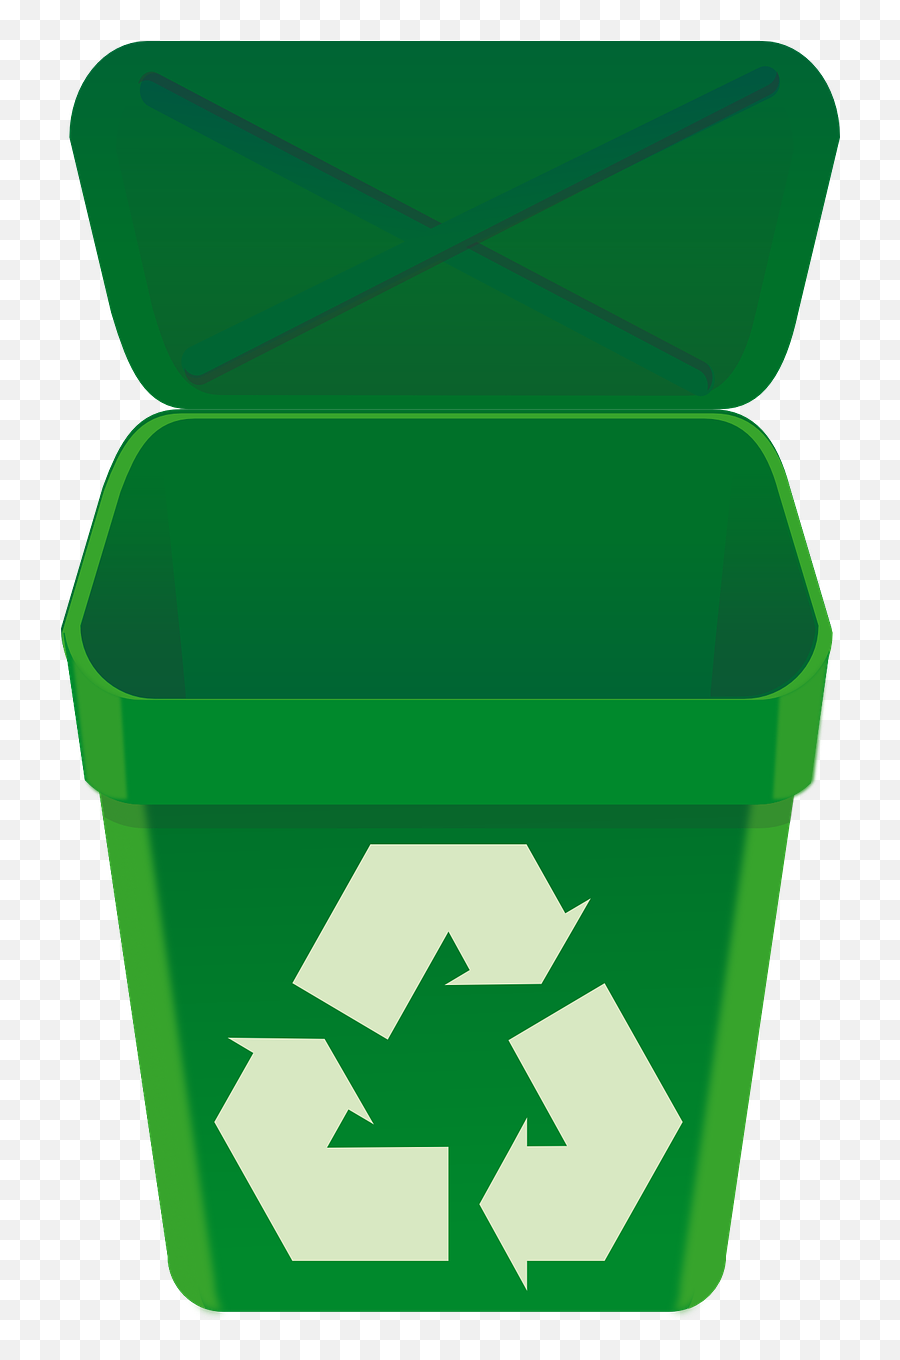 Recycling Logo - Recycle Png White Icon Clipart Full Size Recycle Bin Graphic,Recycling Png